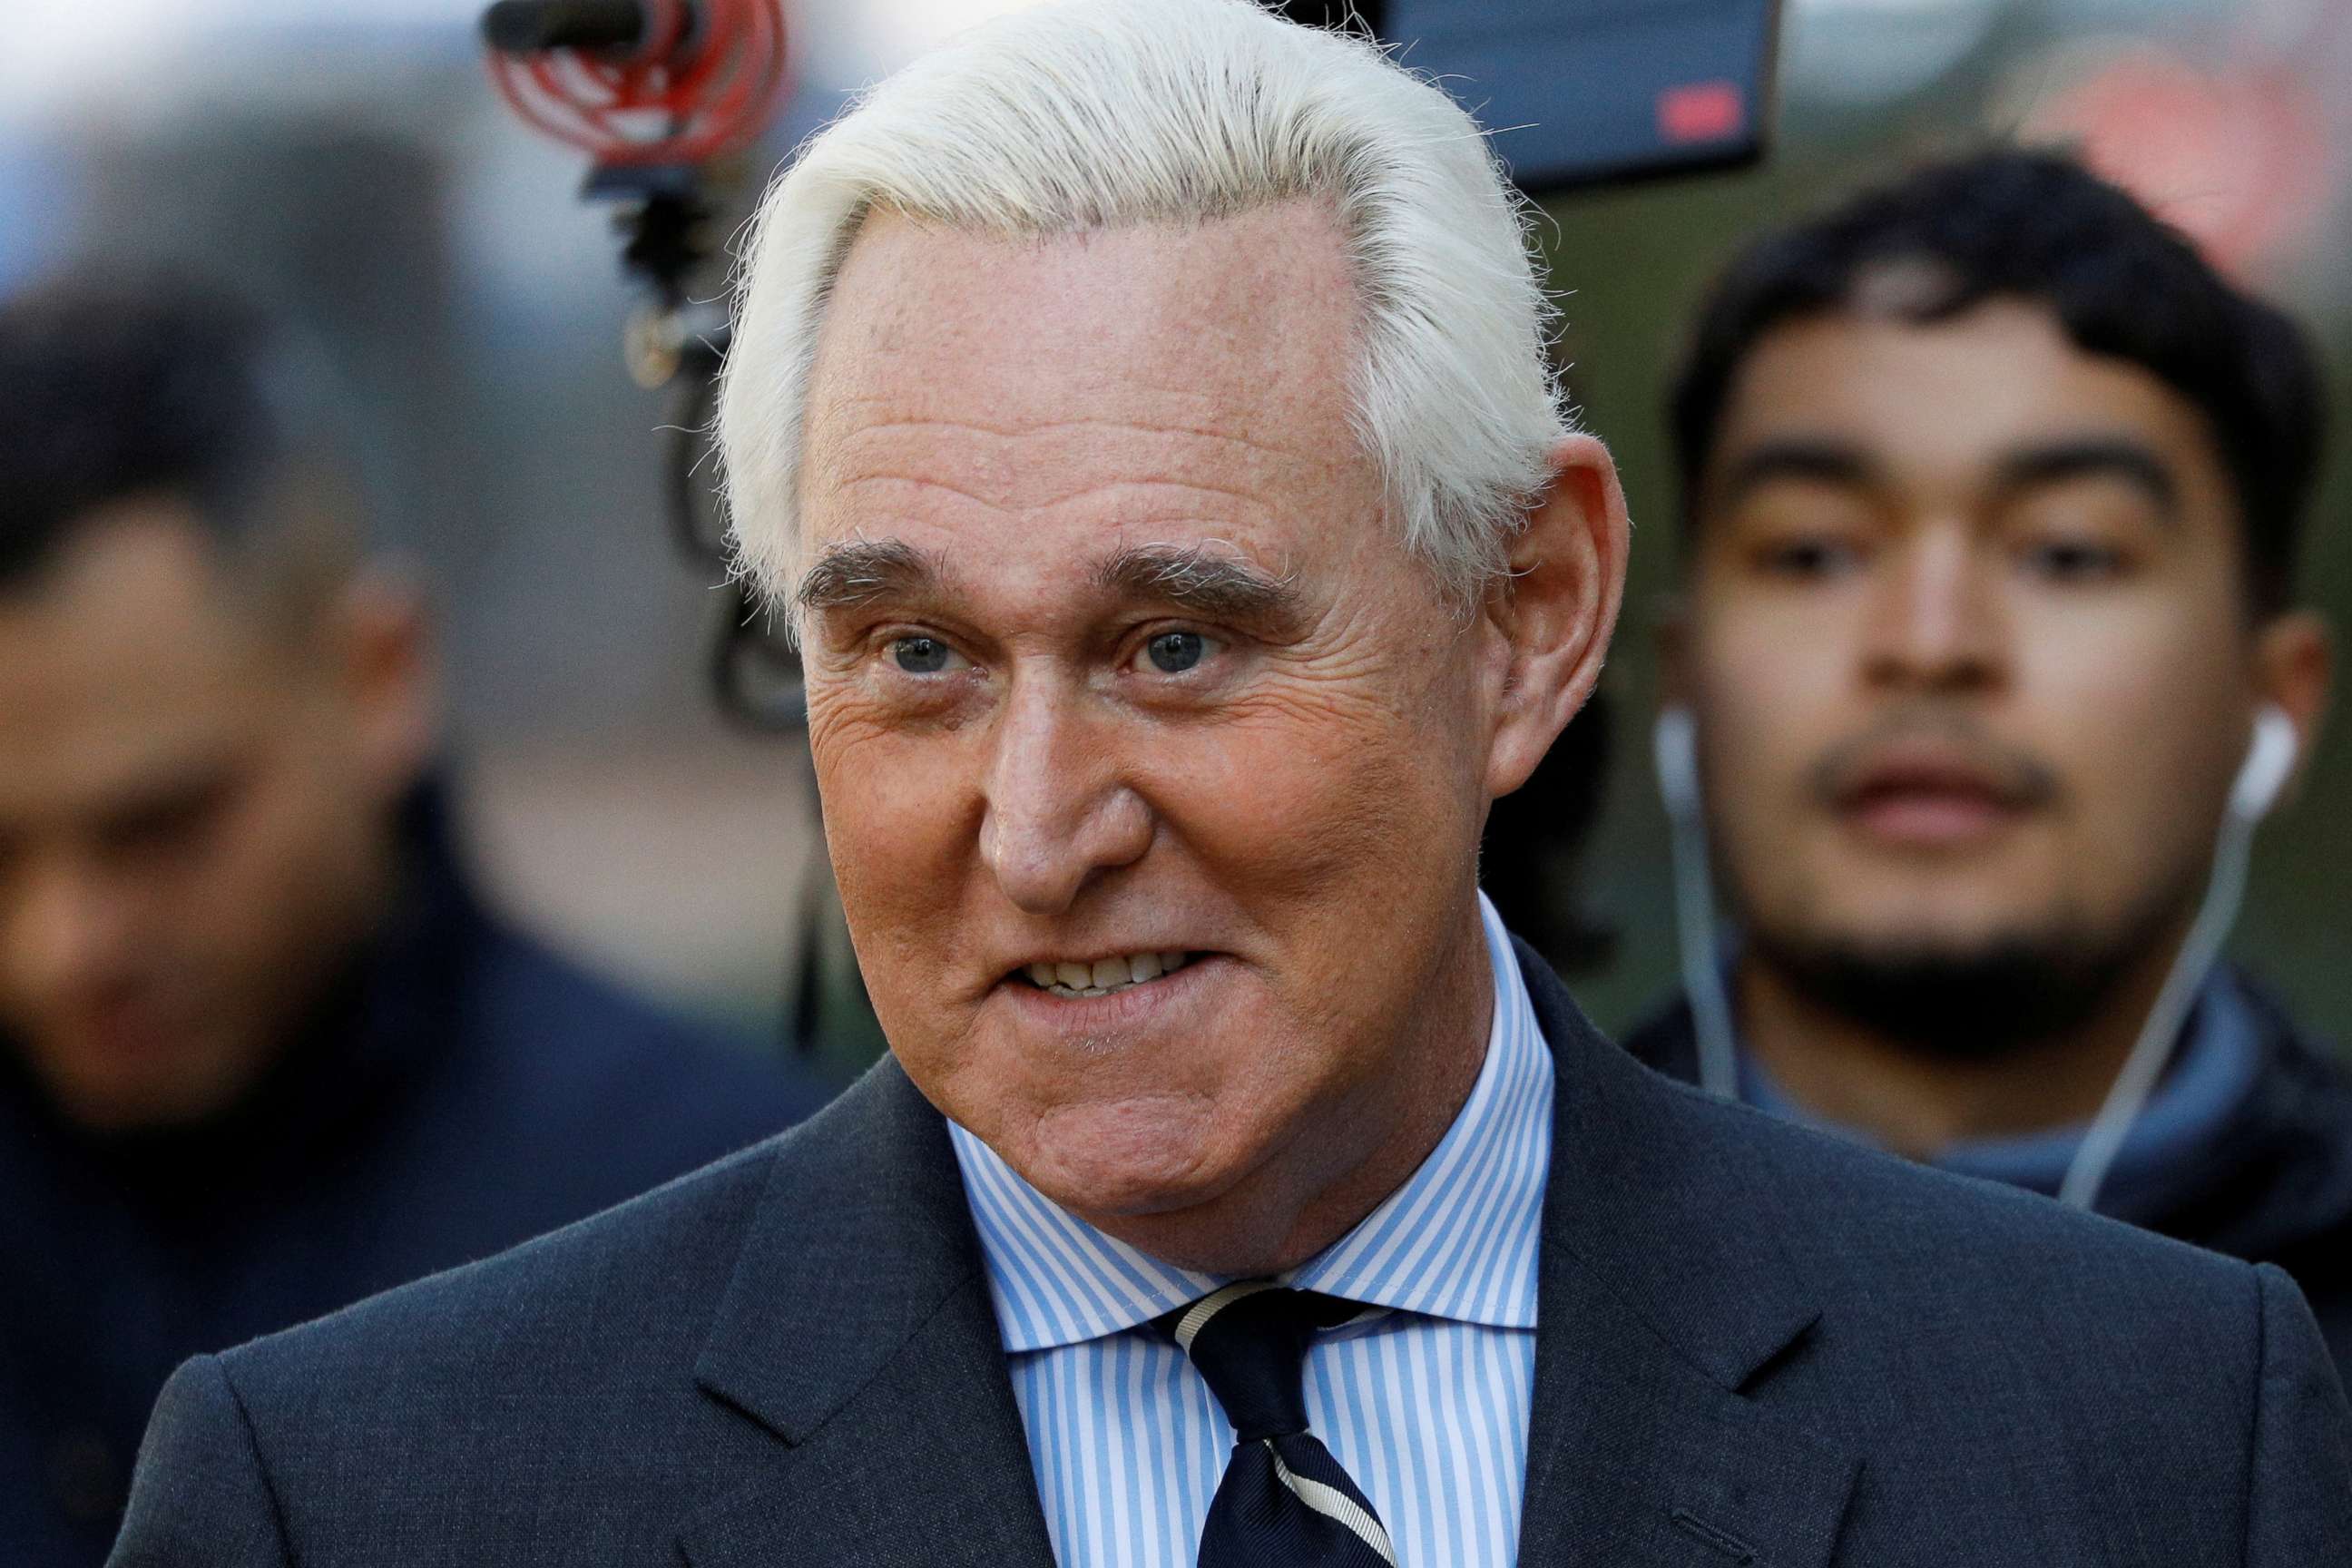 PHOTO: Roger Stone, former campaign adviser to U.S. President Donald Trump, arrives for his criminal trial on charges of lying to Congress, obstructing justice and witness tampering at U.S. District Court in Washington, Nov. 6, 2019. 